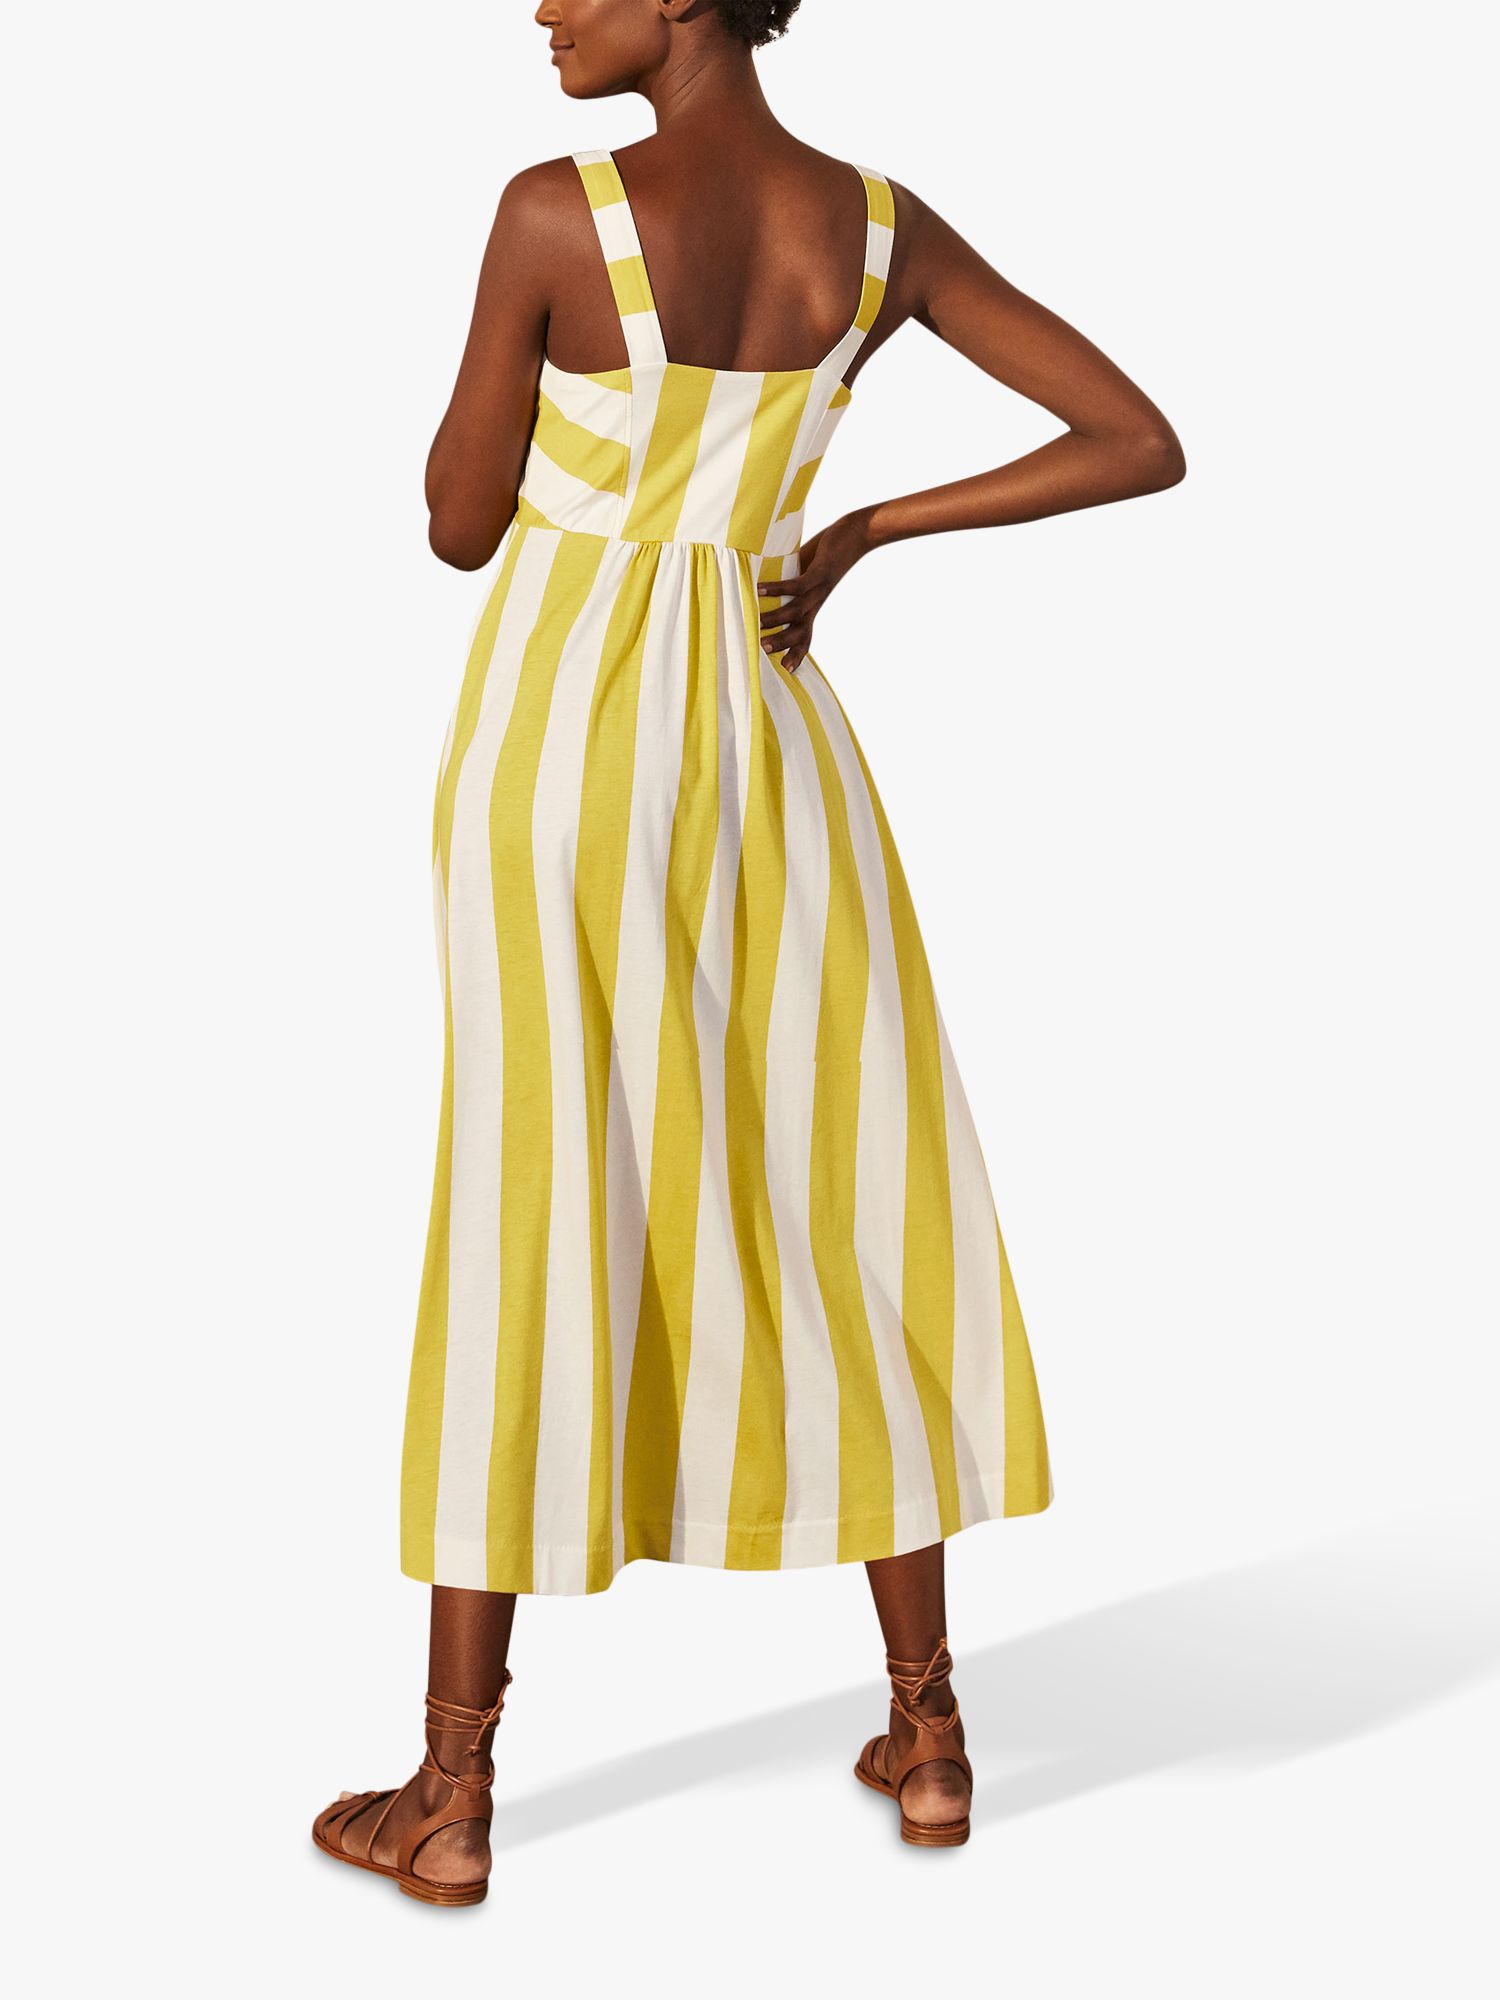 Boden Lucy Stripe Dress, Yellow/Ivory at John Lewis & Partners